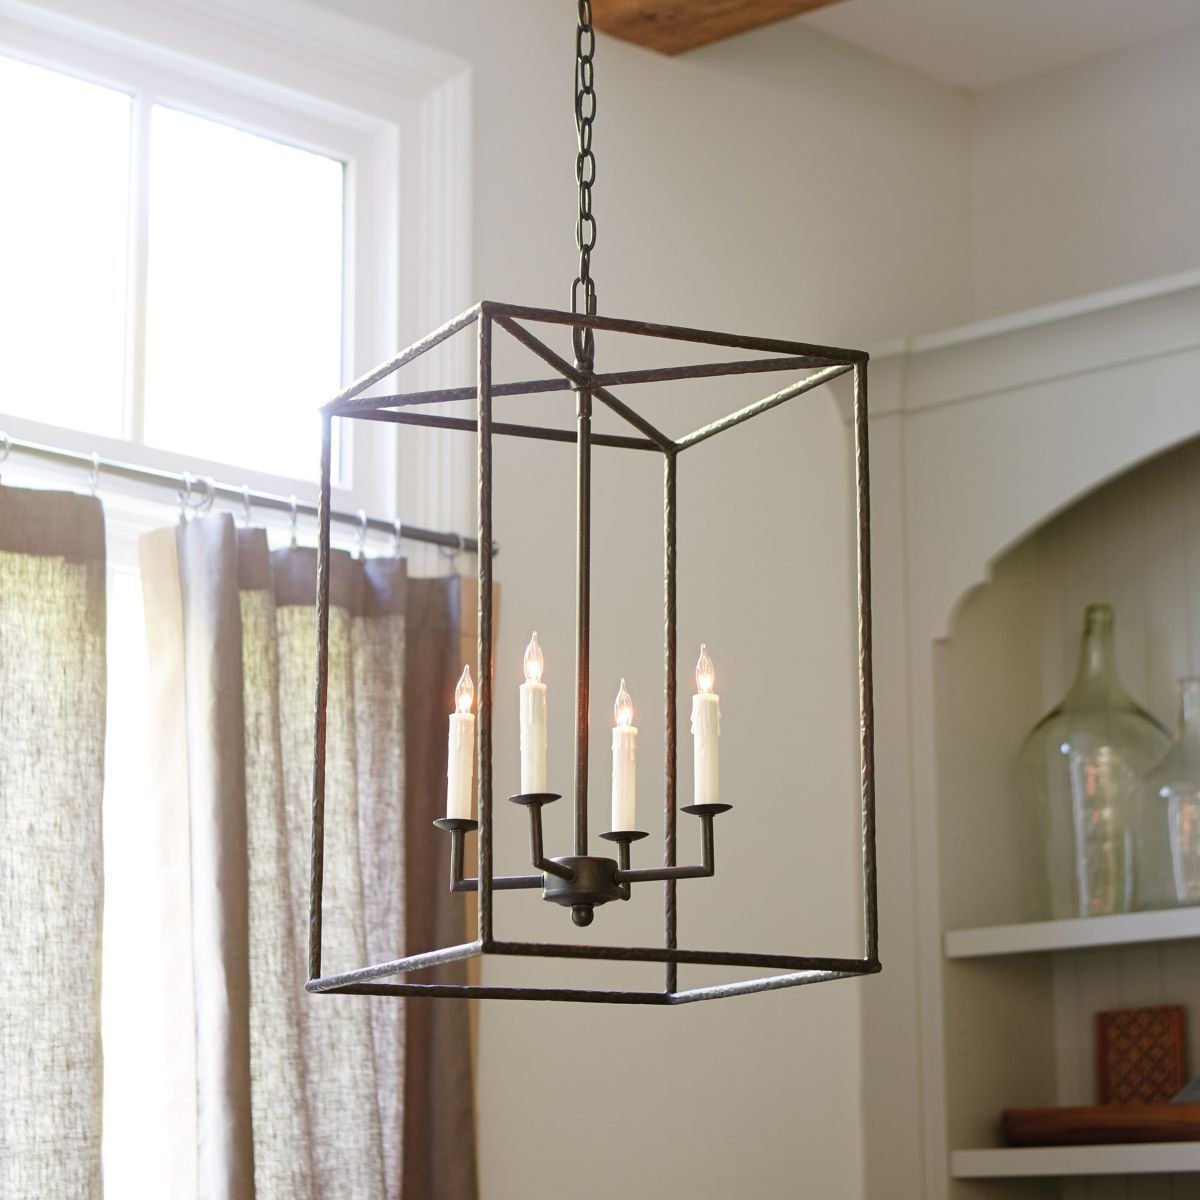 Hadley 4 Light Pendant Chandelier | Home In 2019 | Pendant Throughout William 4 Light Lantern Square / Rectangle Pendants (View 12 of 30)